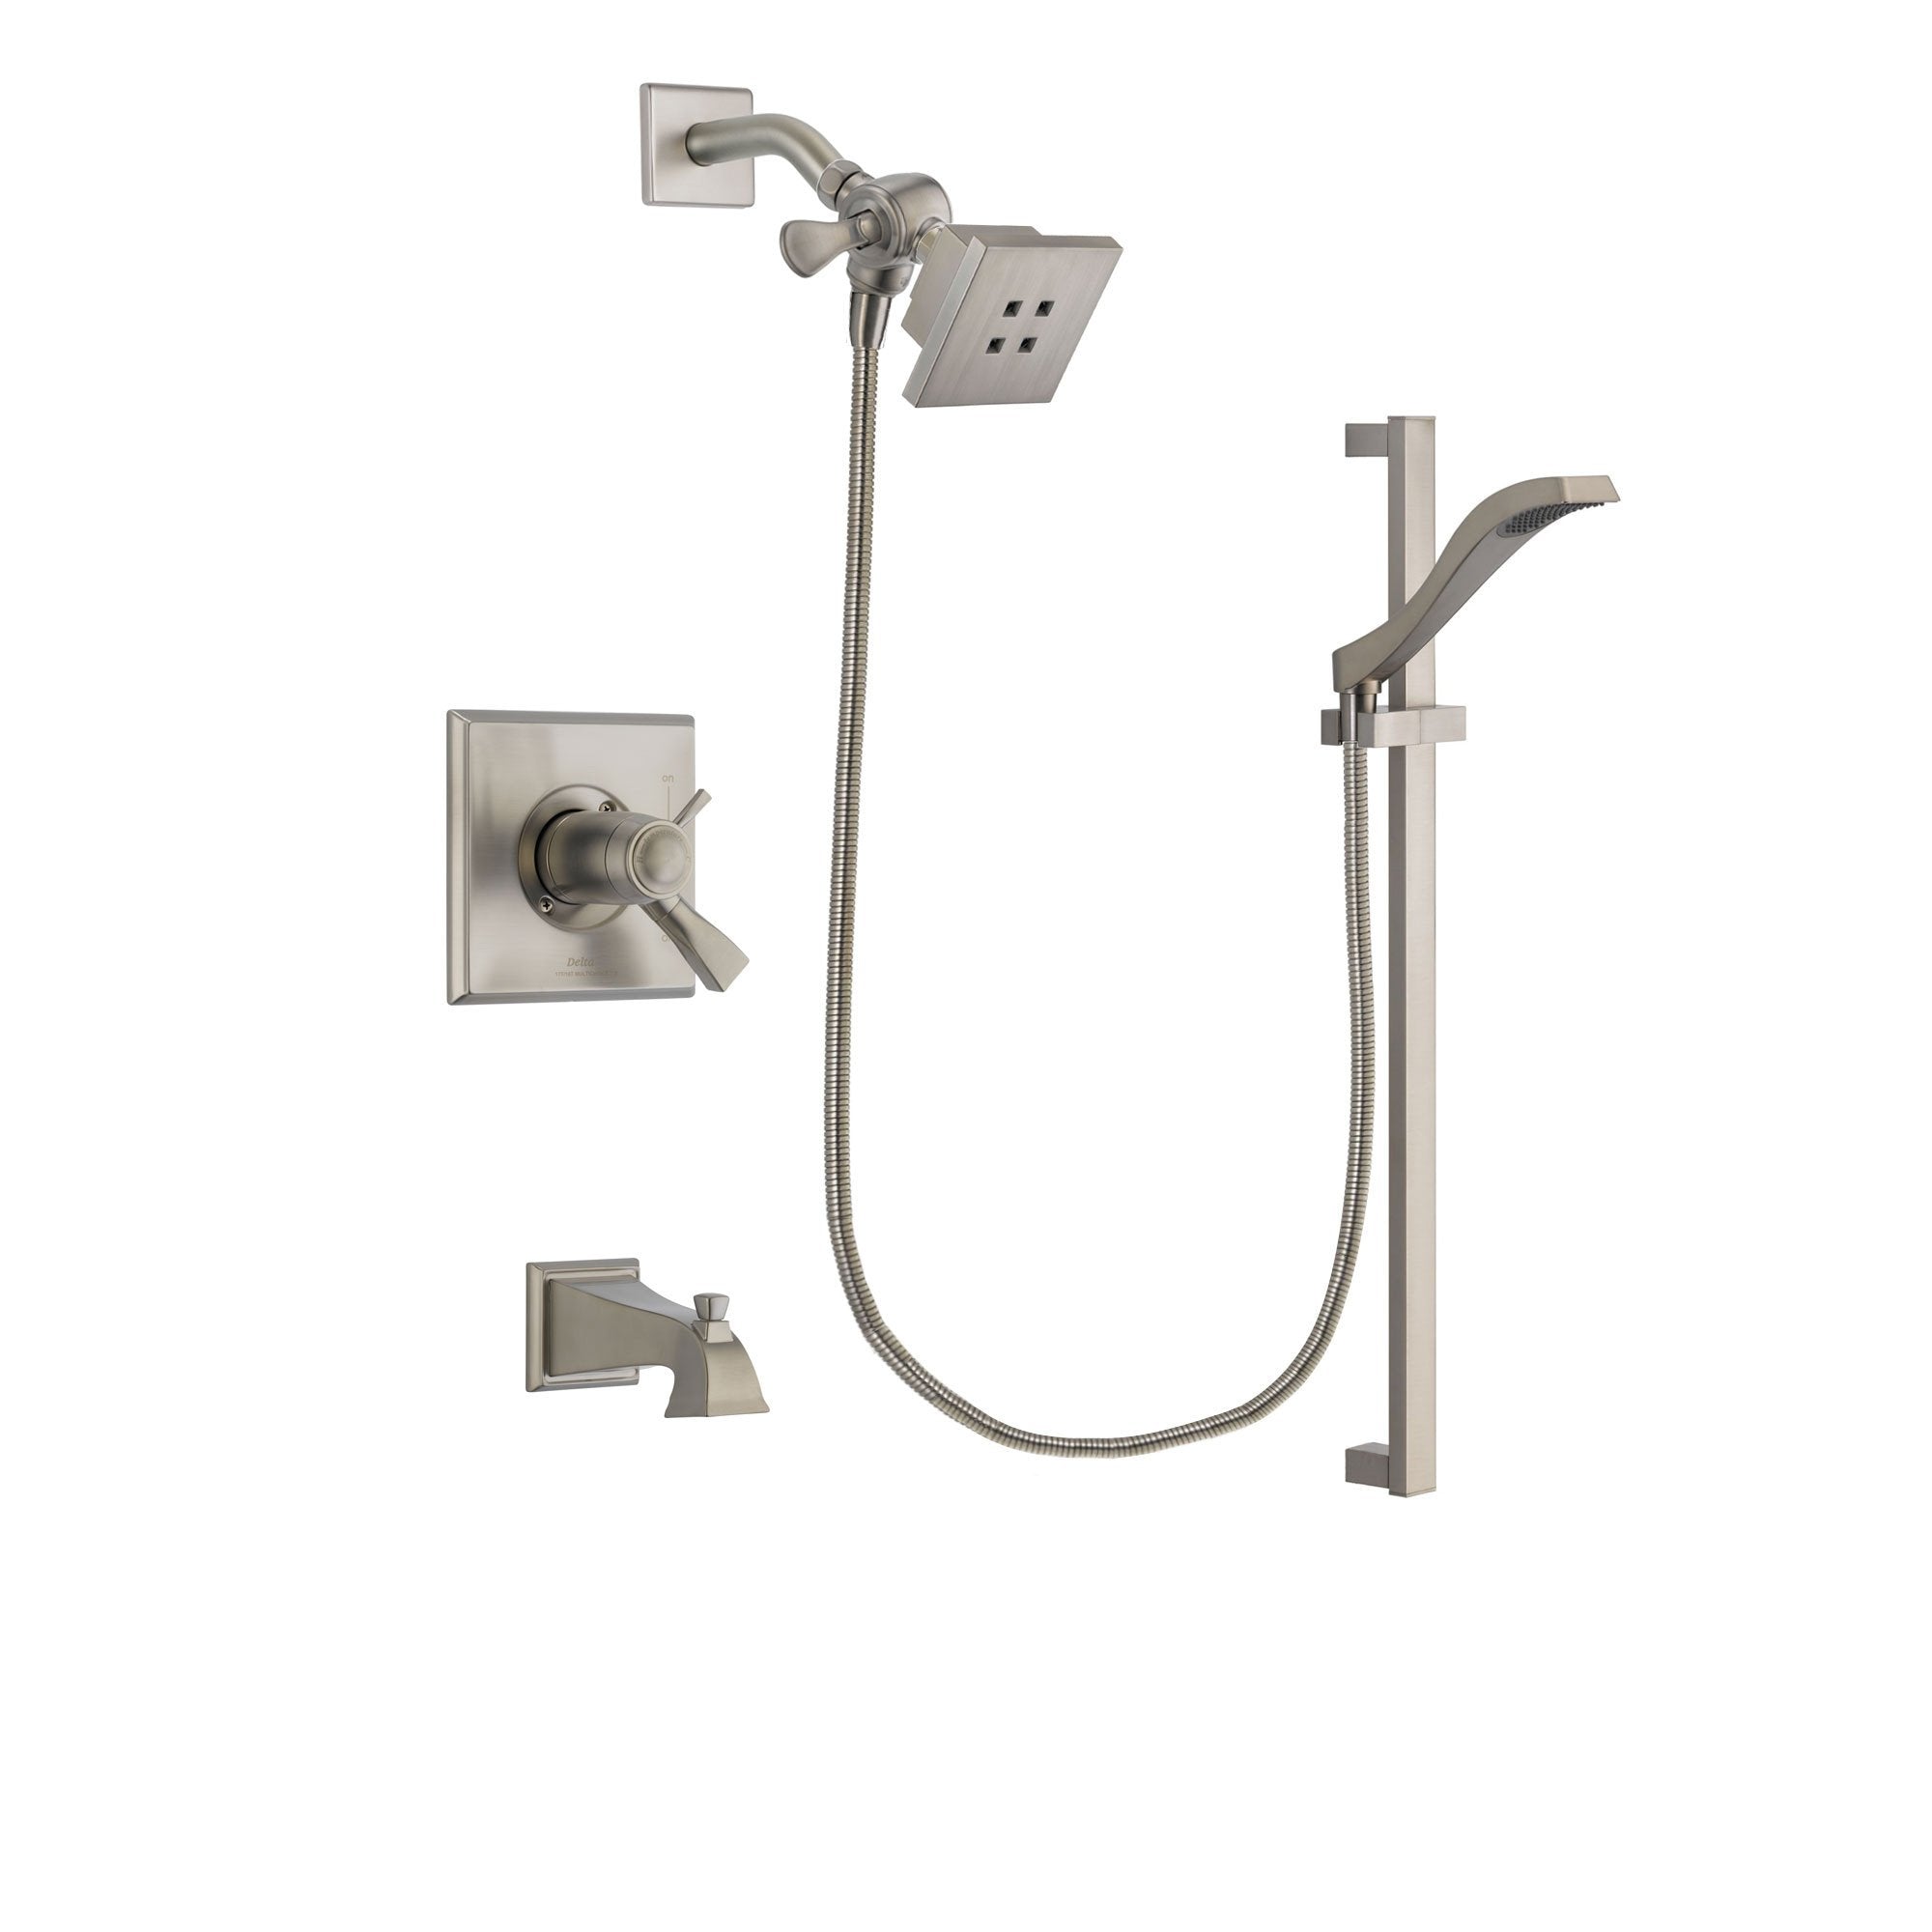 Delta Dryden Stainless Steel Finish Thermostatic Tub and Shower Faucet System Package with Square Showerhead and Handheld Shower with Slide Bar Includes Rough-in Valve and Tub Spout DSP2219V